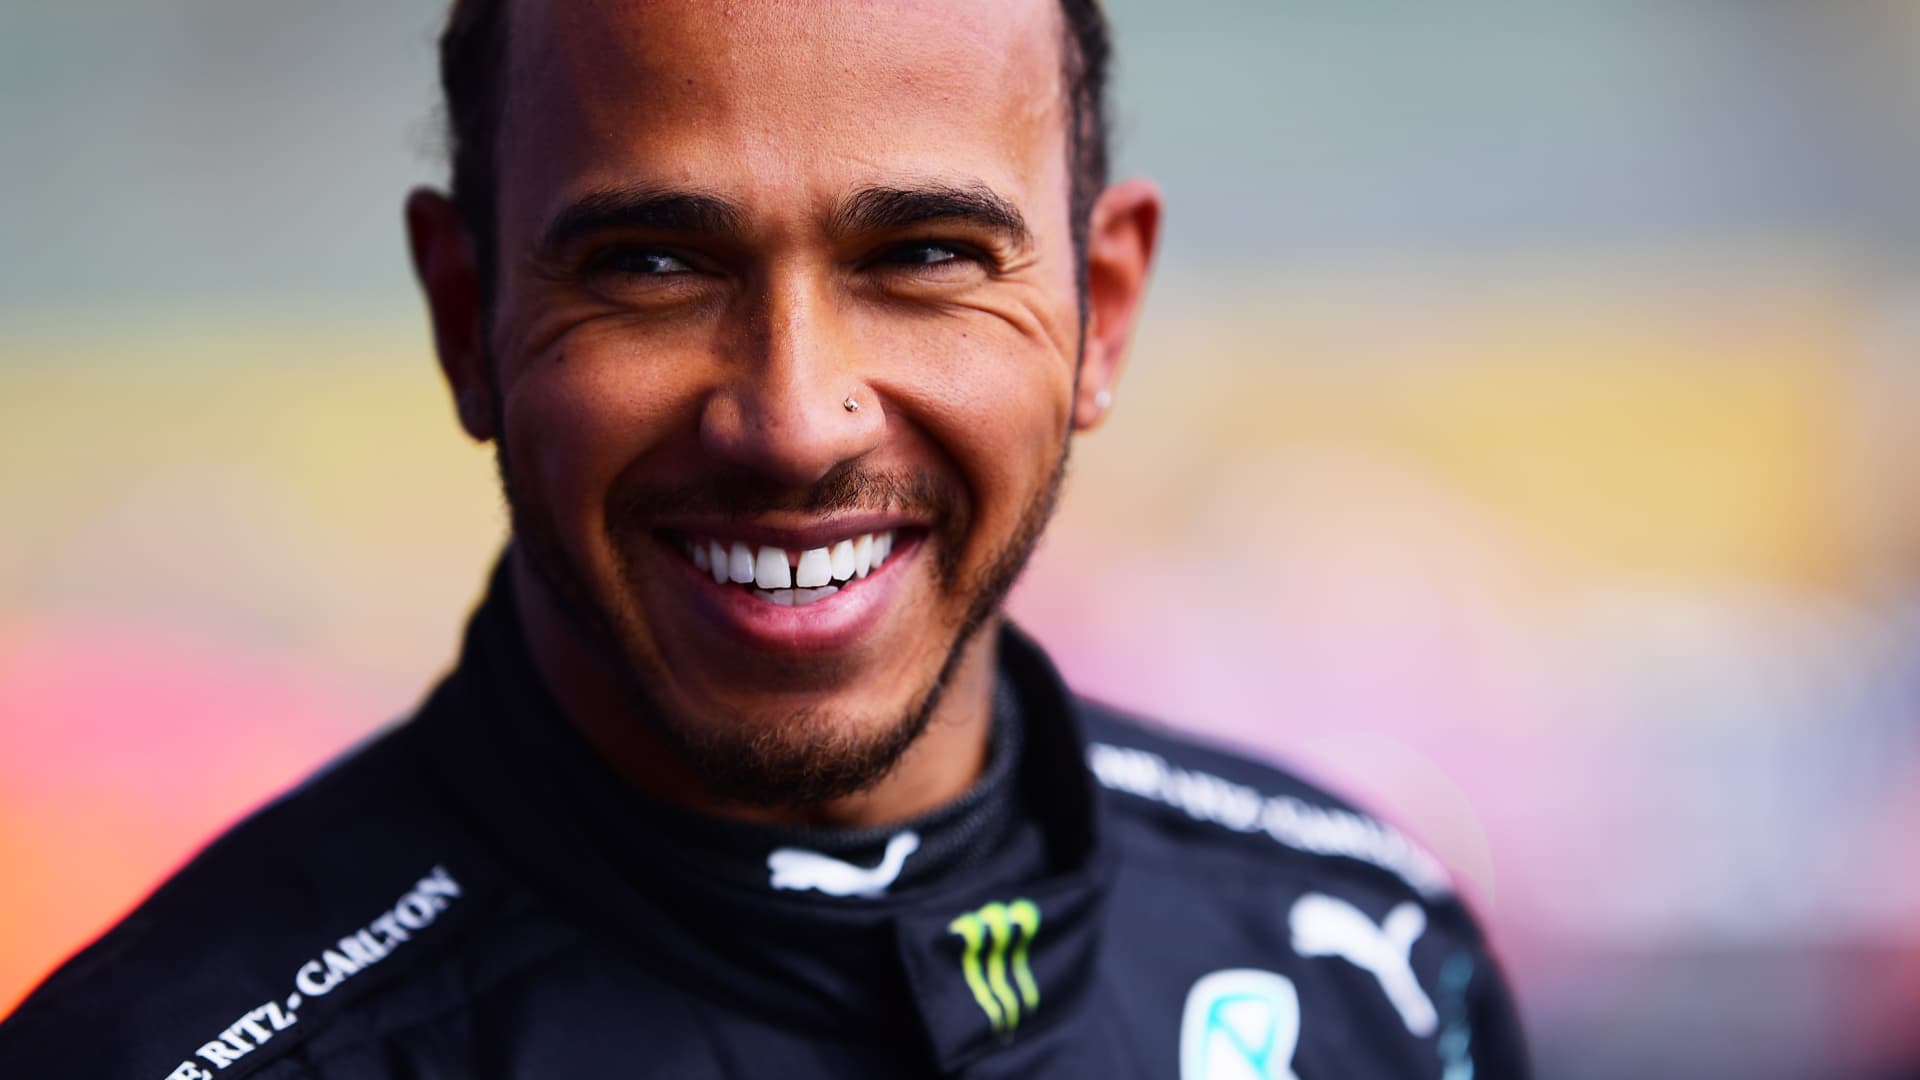 Pole position qualifier Lewis Hamilton of Great Britain and Mercedes GP looks on in parc ferme during qualifying ahead of the F1 Grand Prix of Emilia Romagna at Autodromo Enzo e Dino Ferrari on April 17, 2021 in Imola, Italy.